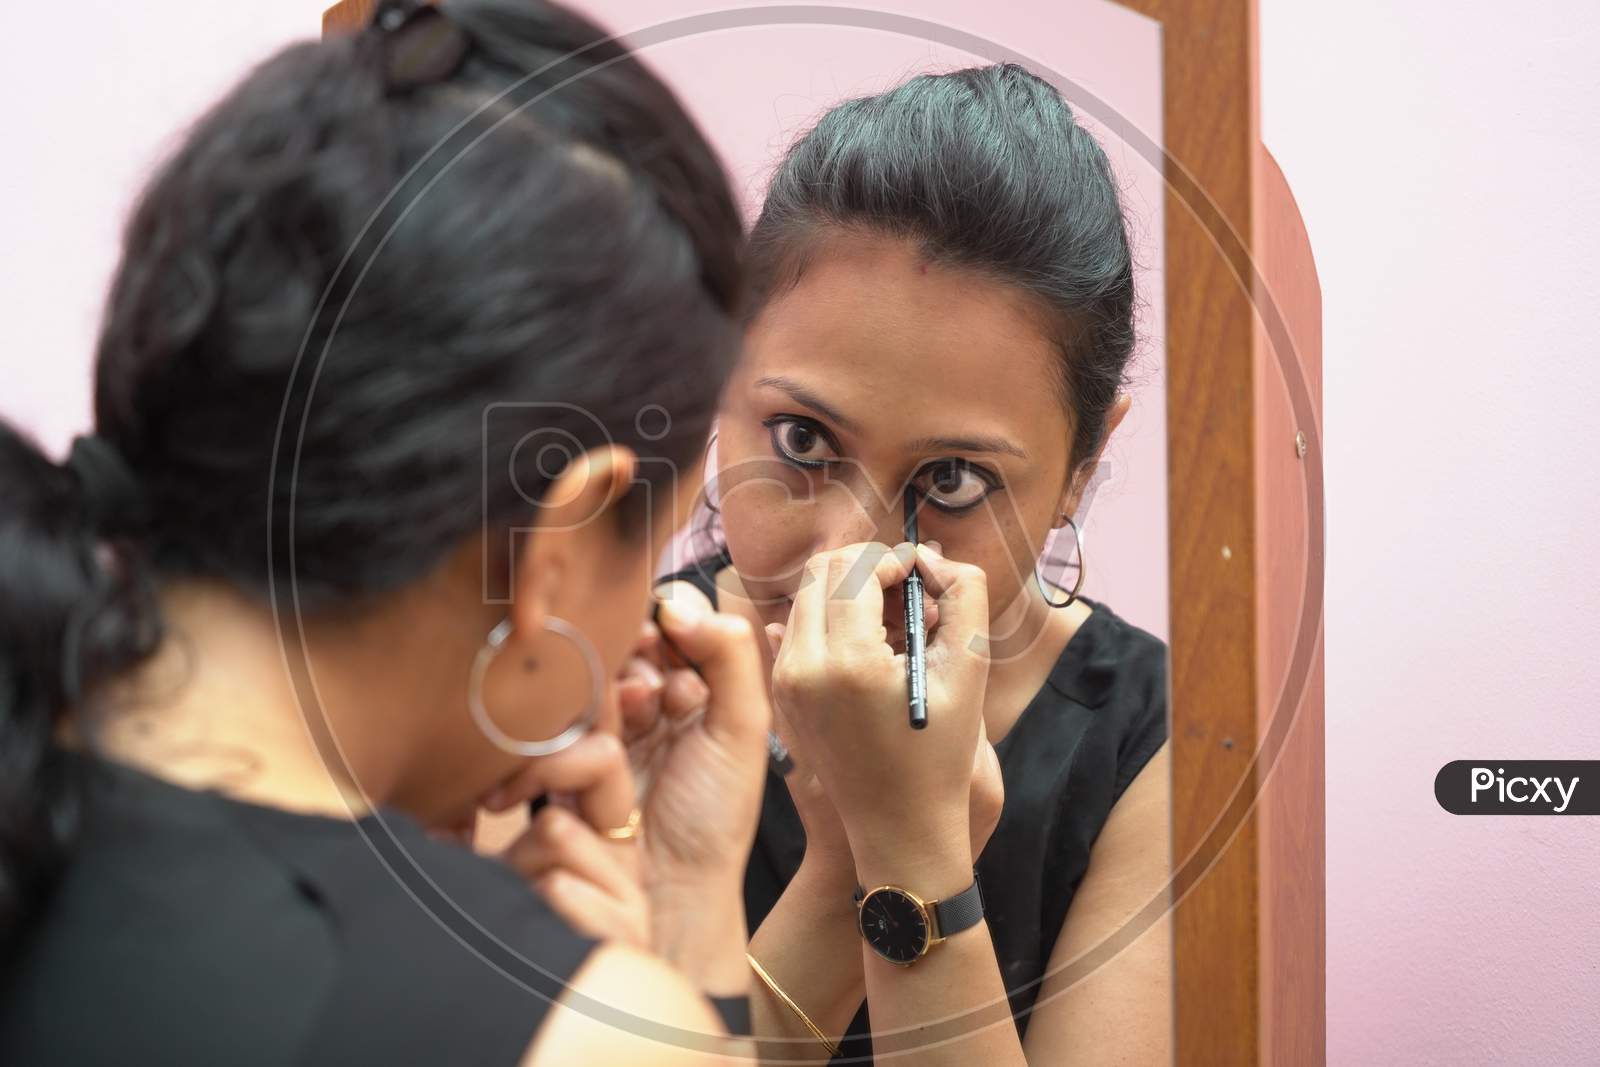 A Lady In 30S Putting Leye Liner Make Up In Front Of A Mirror. Close Up View